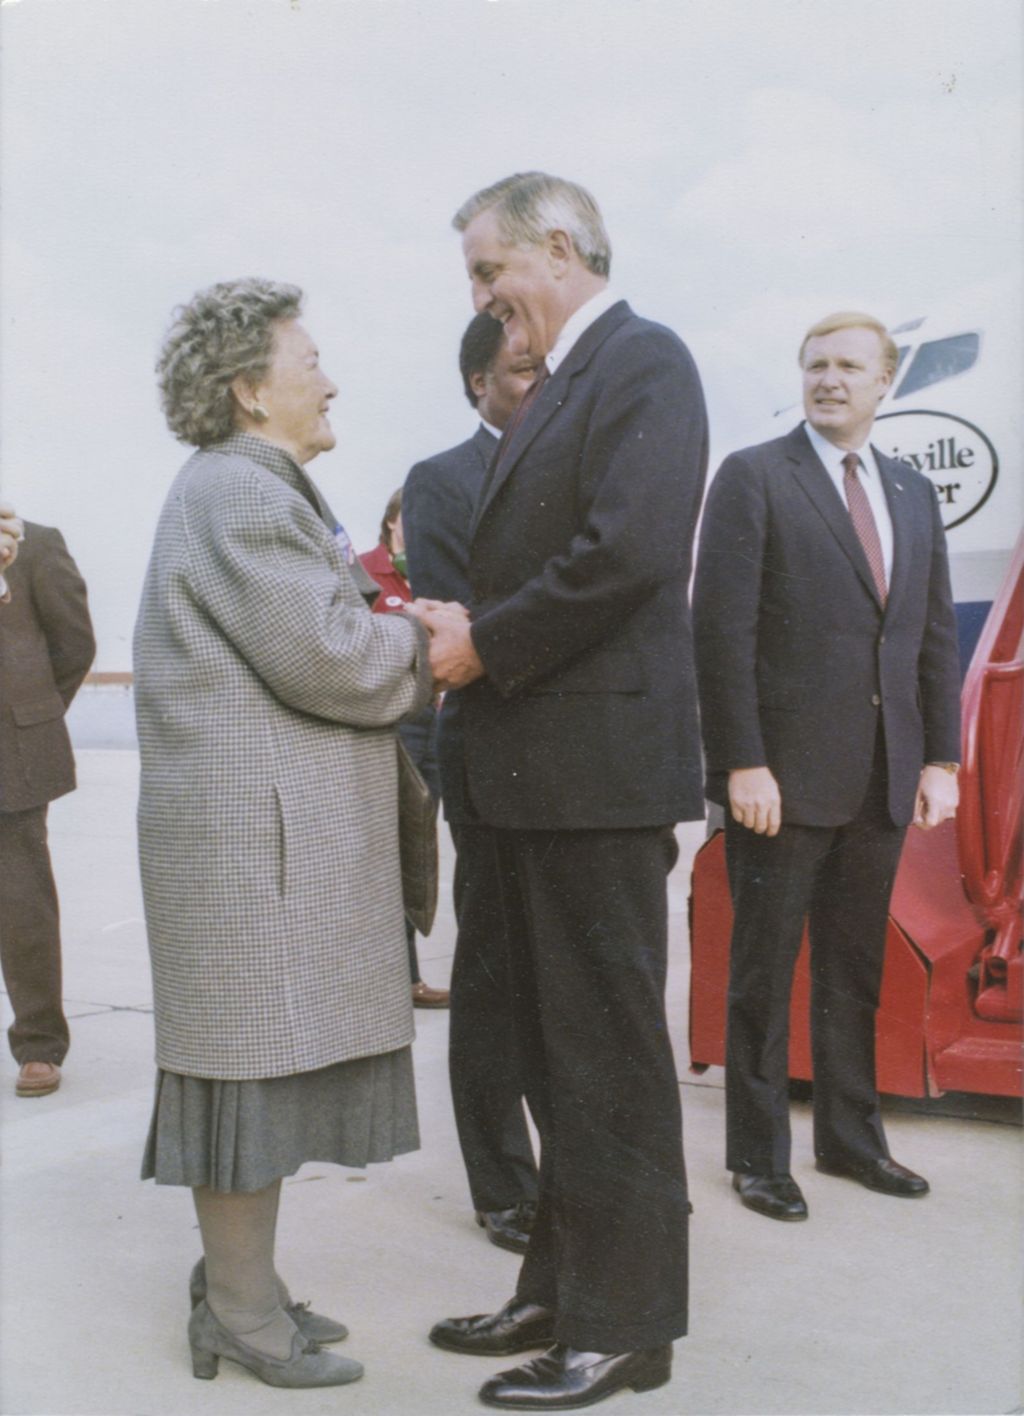 Miniature of Eleanor Daley with Walter Mondale at O'Hare airport